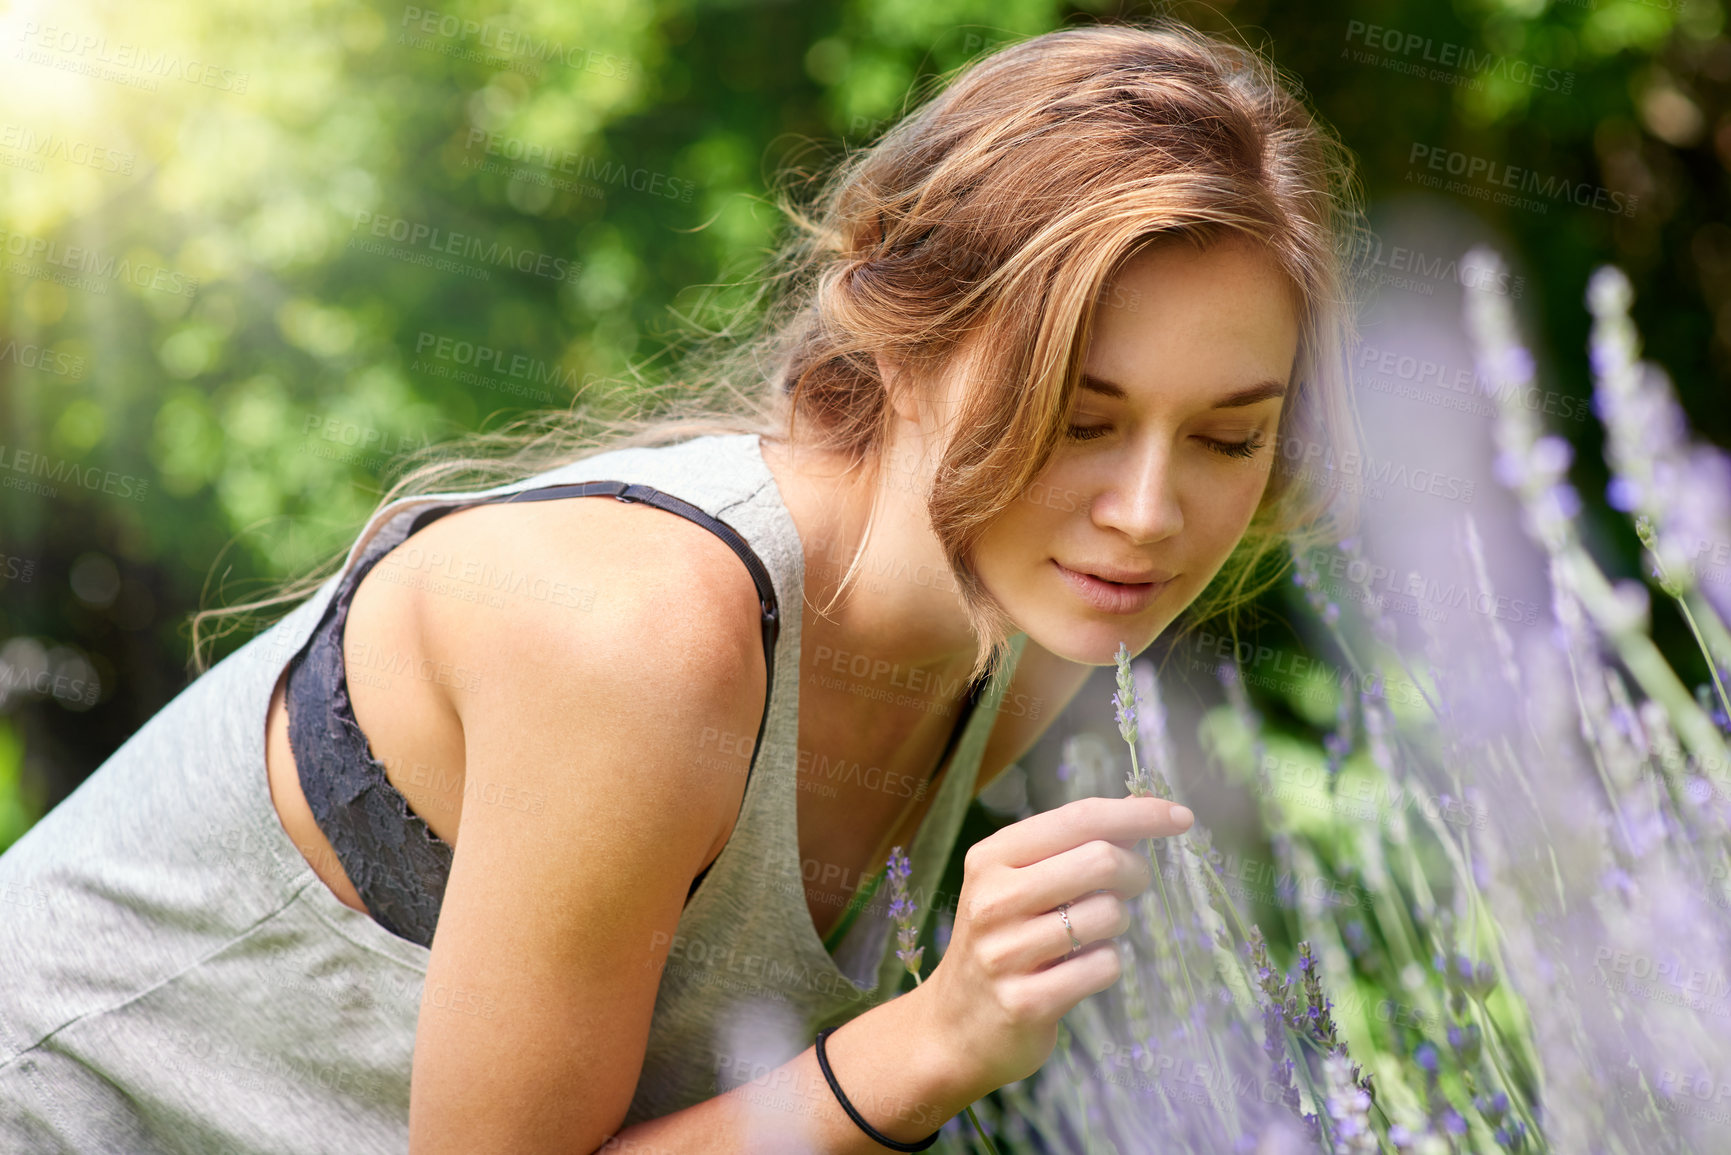 Buy stock photo A young woman smelling lavender in her garden